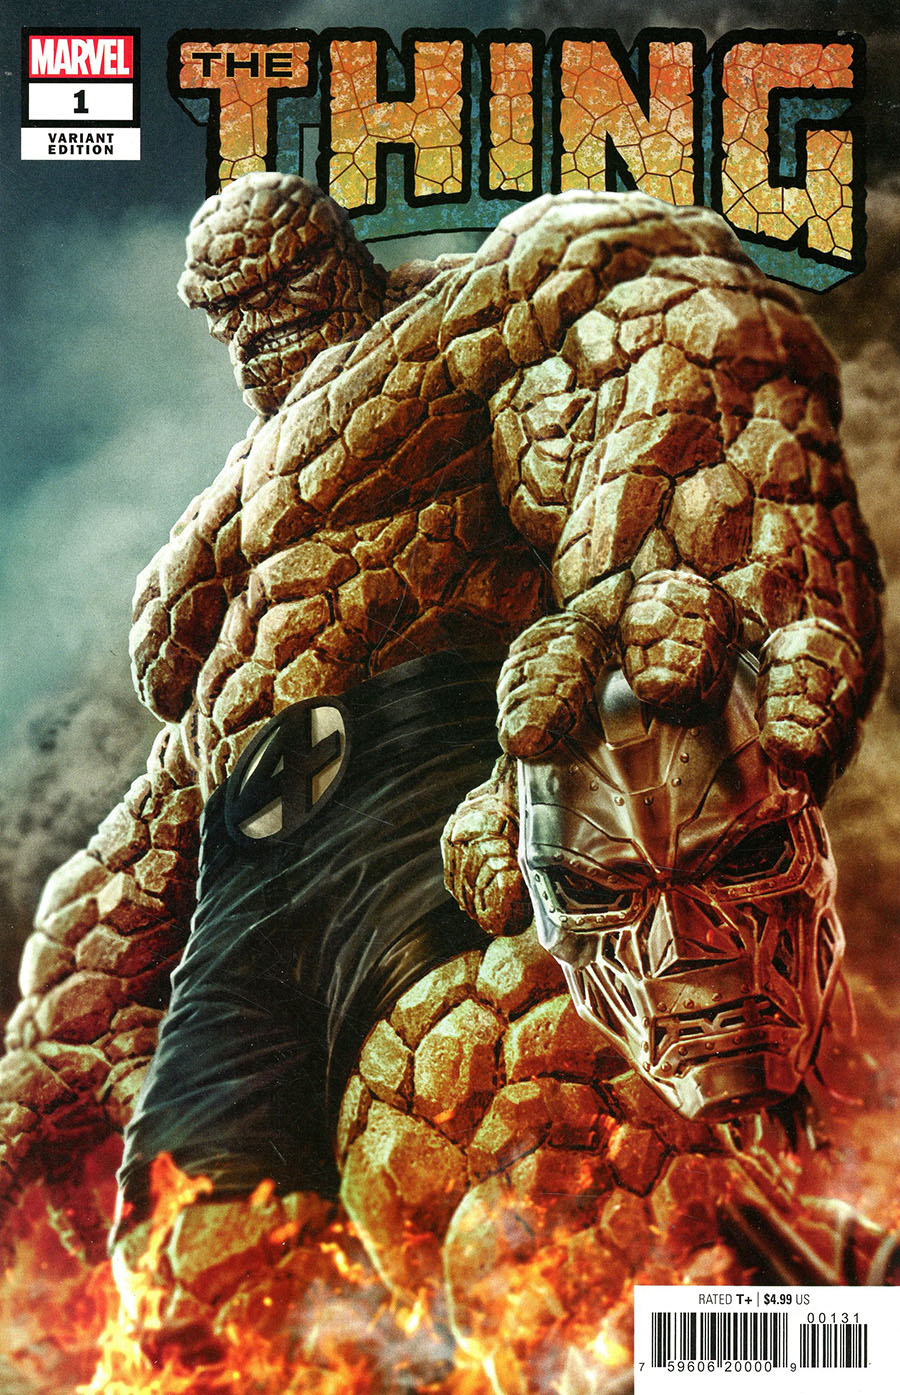 Thing Vol 3 #1 Cover C Variant Lee Bermejo Cover (Limit 1 Per Customer)